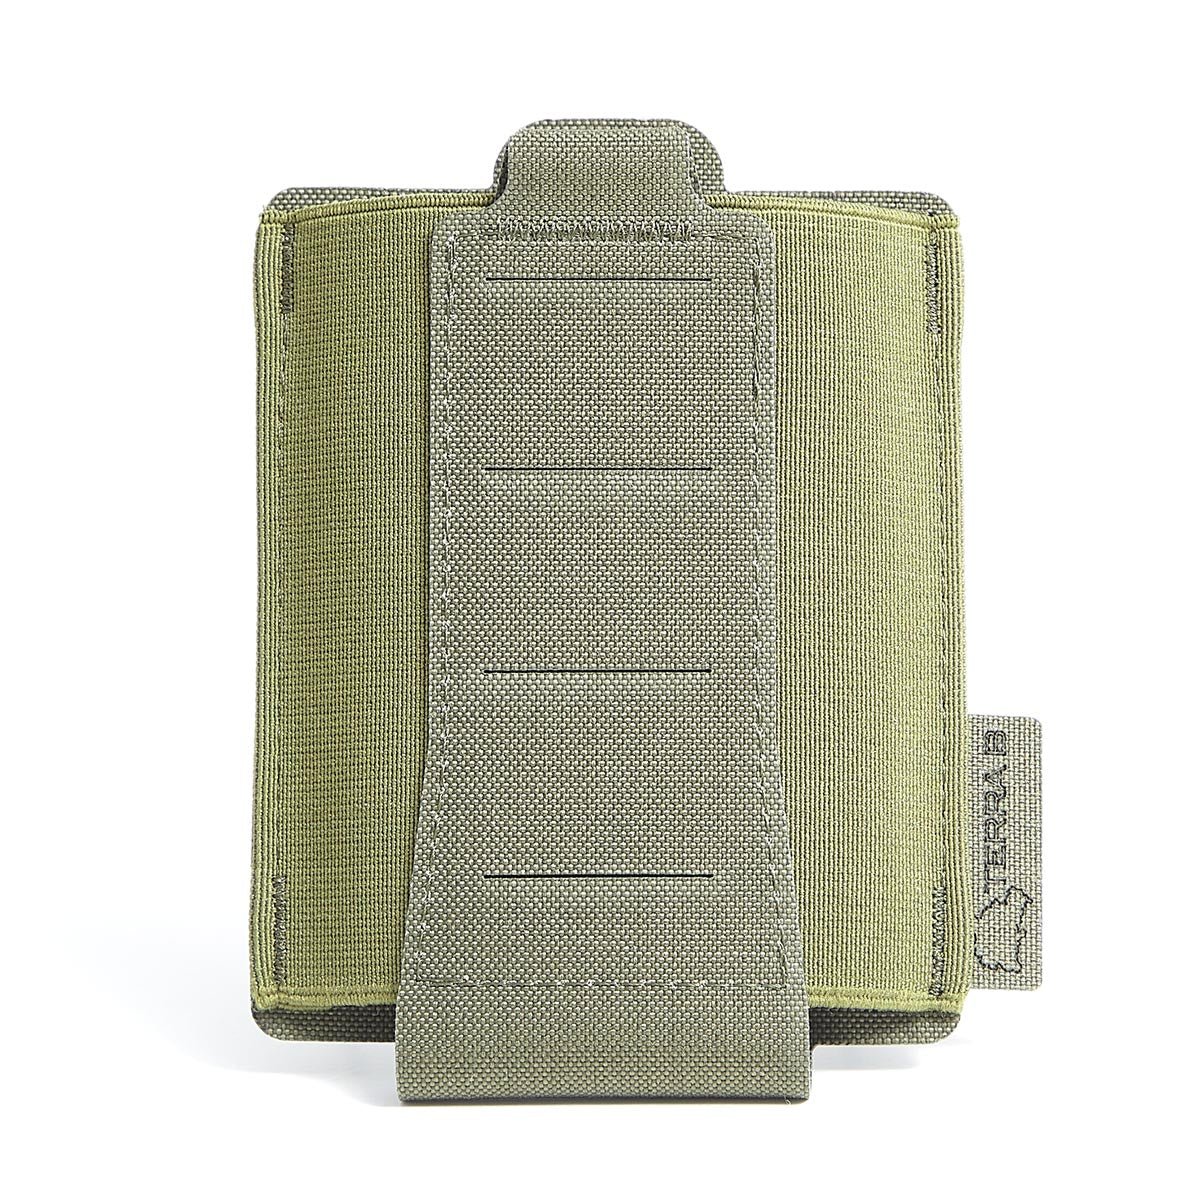 TERRA B Discreet Pouch Large - Olive